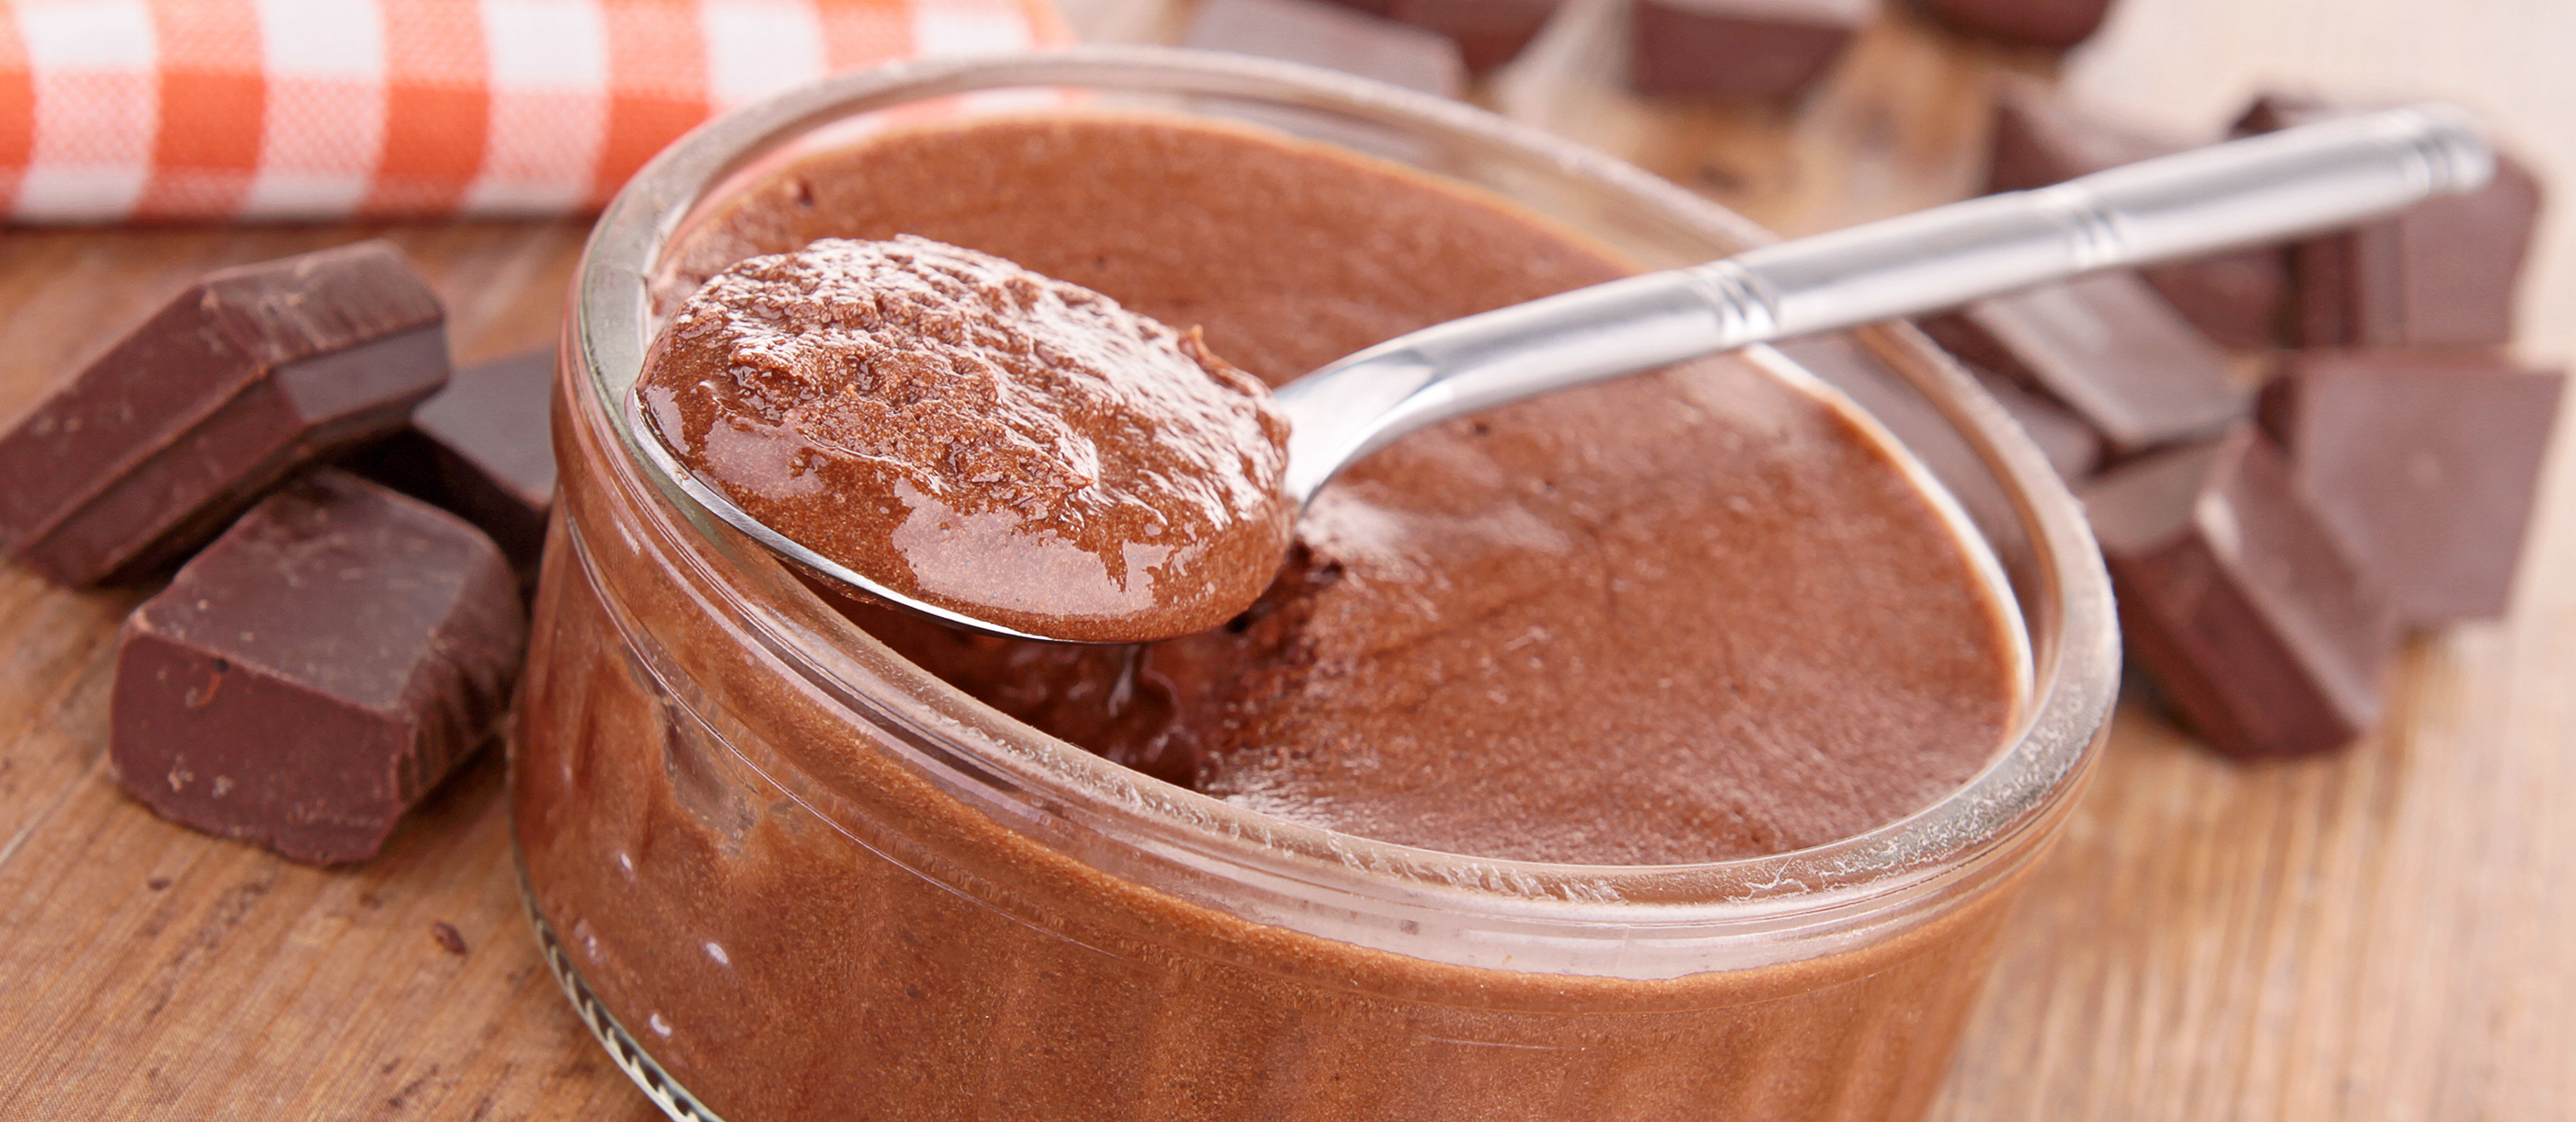 Mousse au Chocolat | Traditional Chocolate Dessert From France